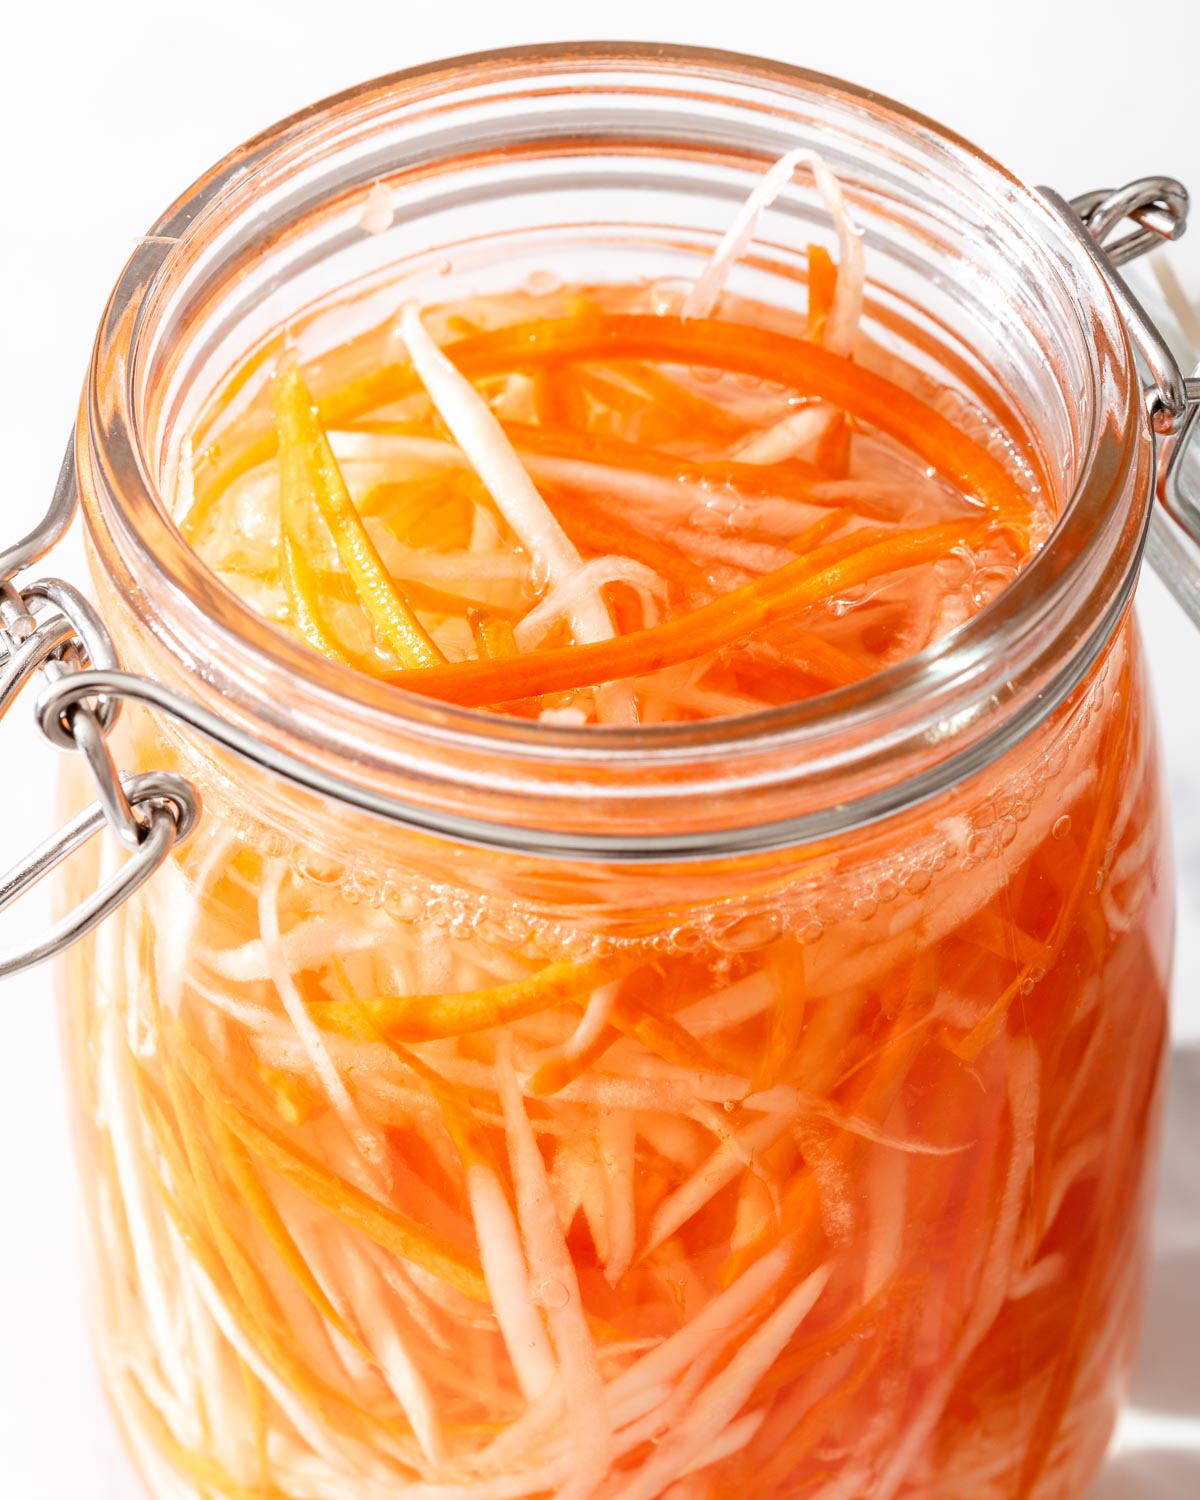 An open jar of pickling carrots and daikon